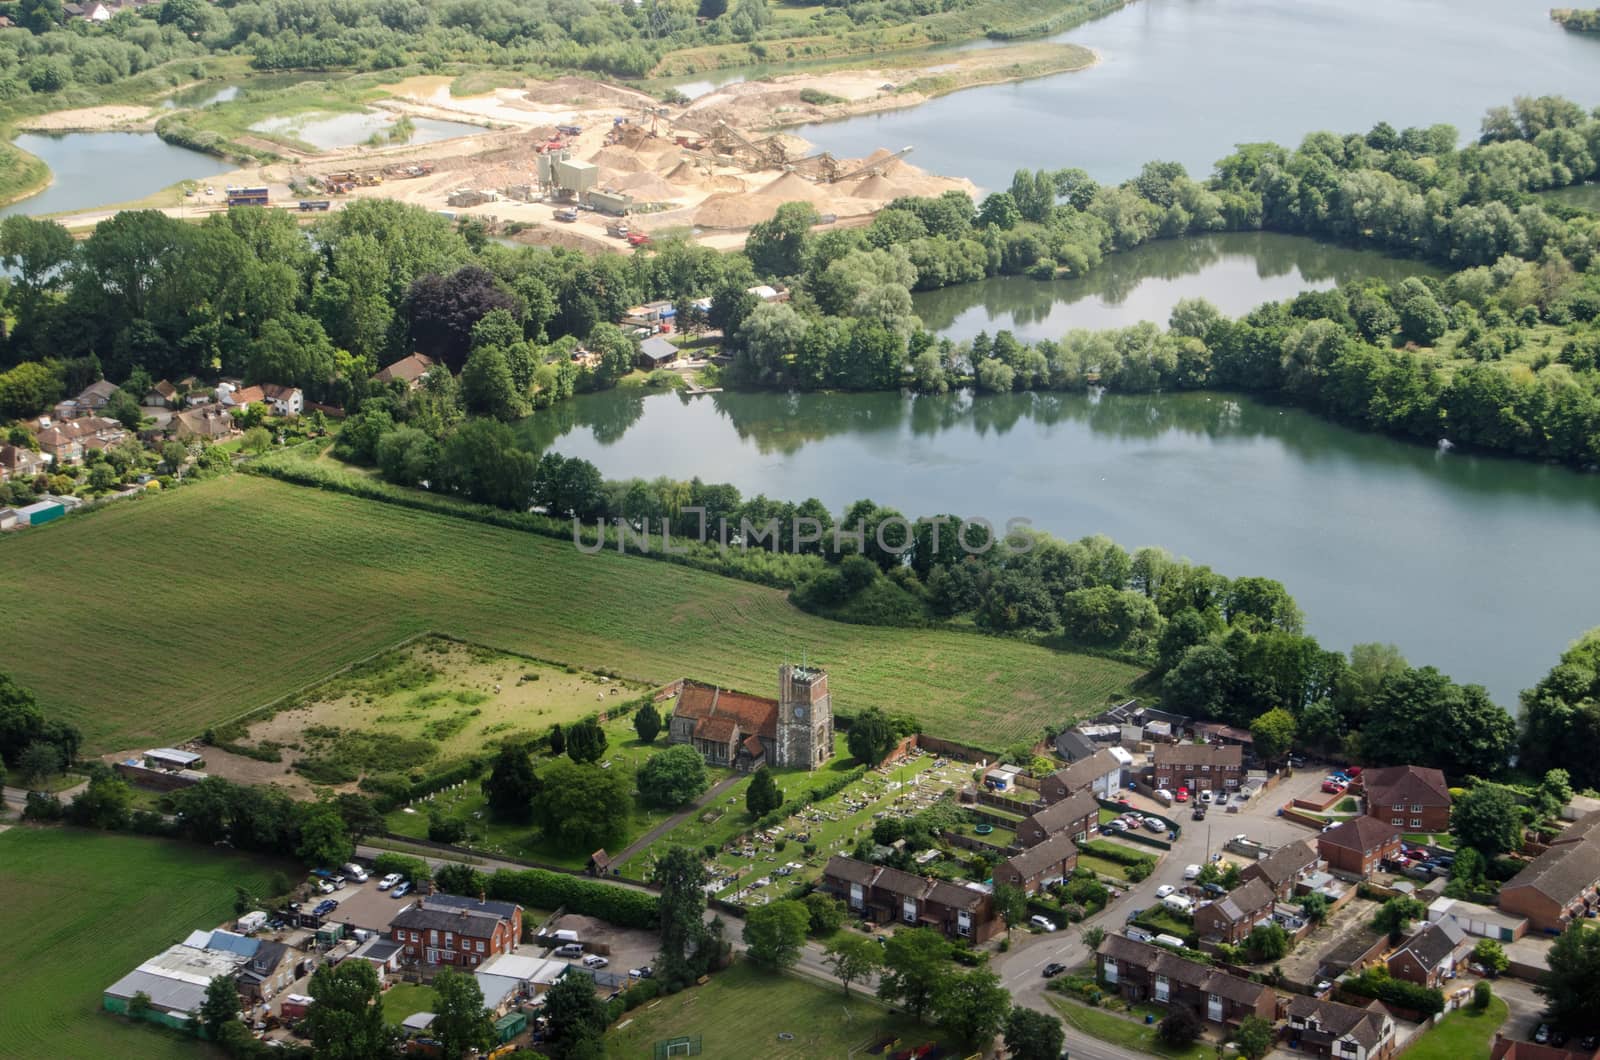 Aerial view on the approach to London's Heathrow Airport of the parish church of St Michael in Horton near Slough in Berkshire.  Beyond the church is the Cemex cement works.